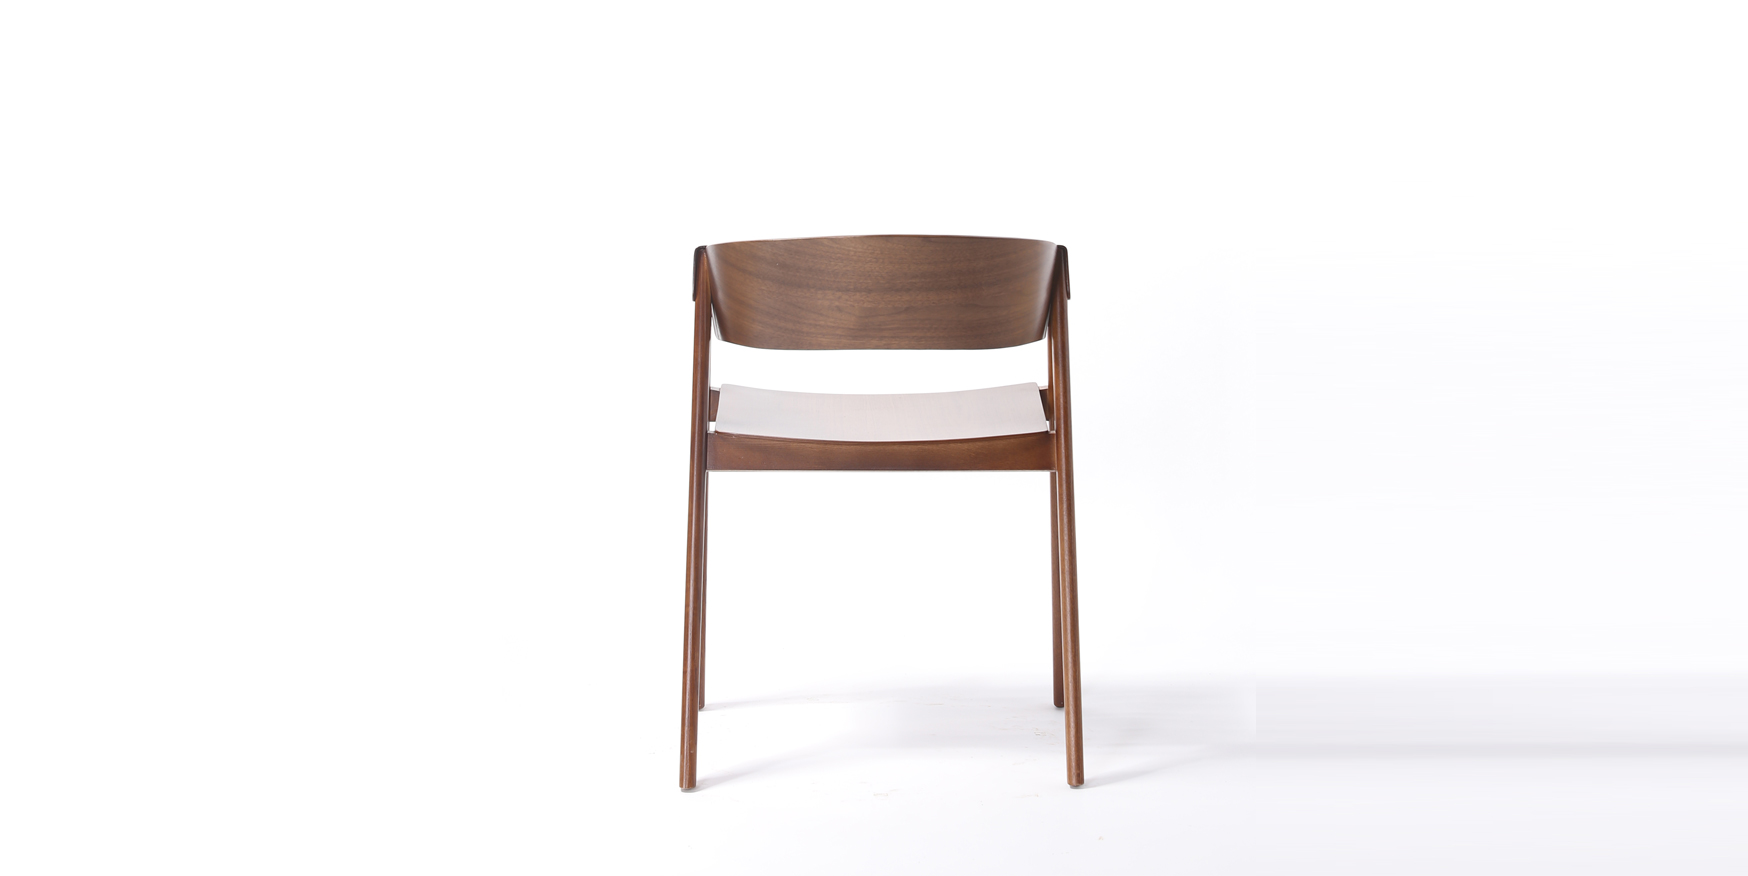 dining table chair with arms
